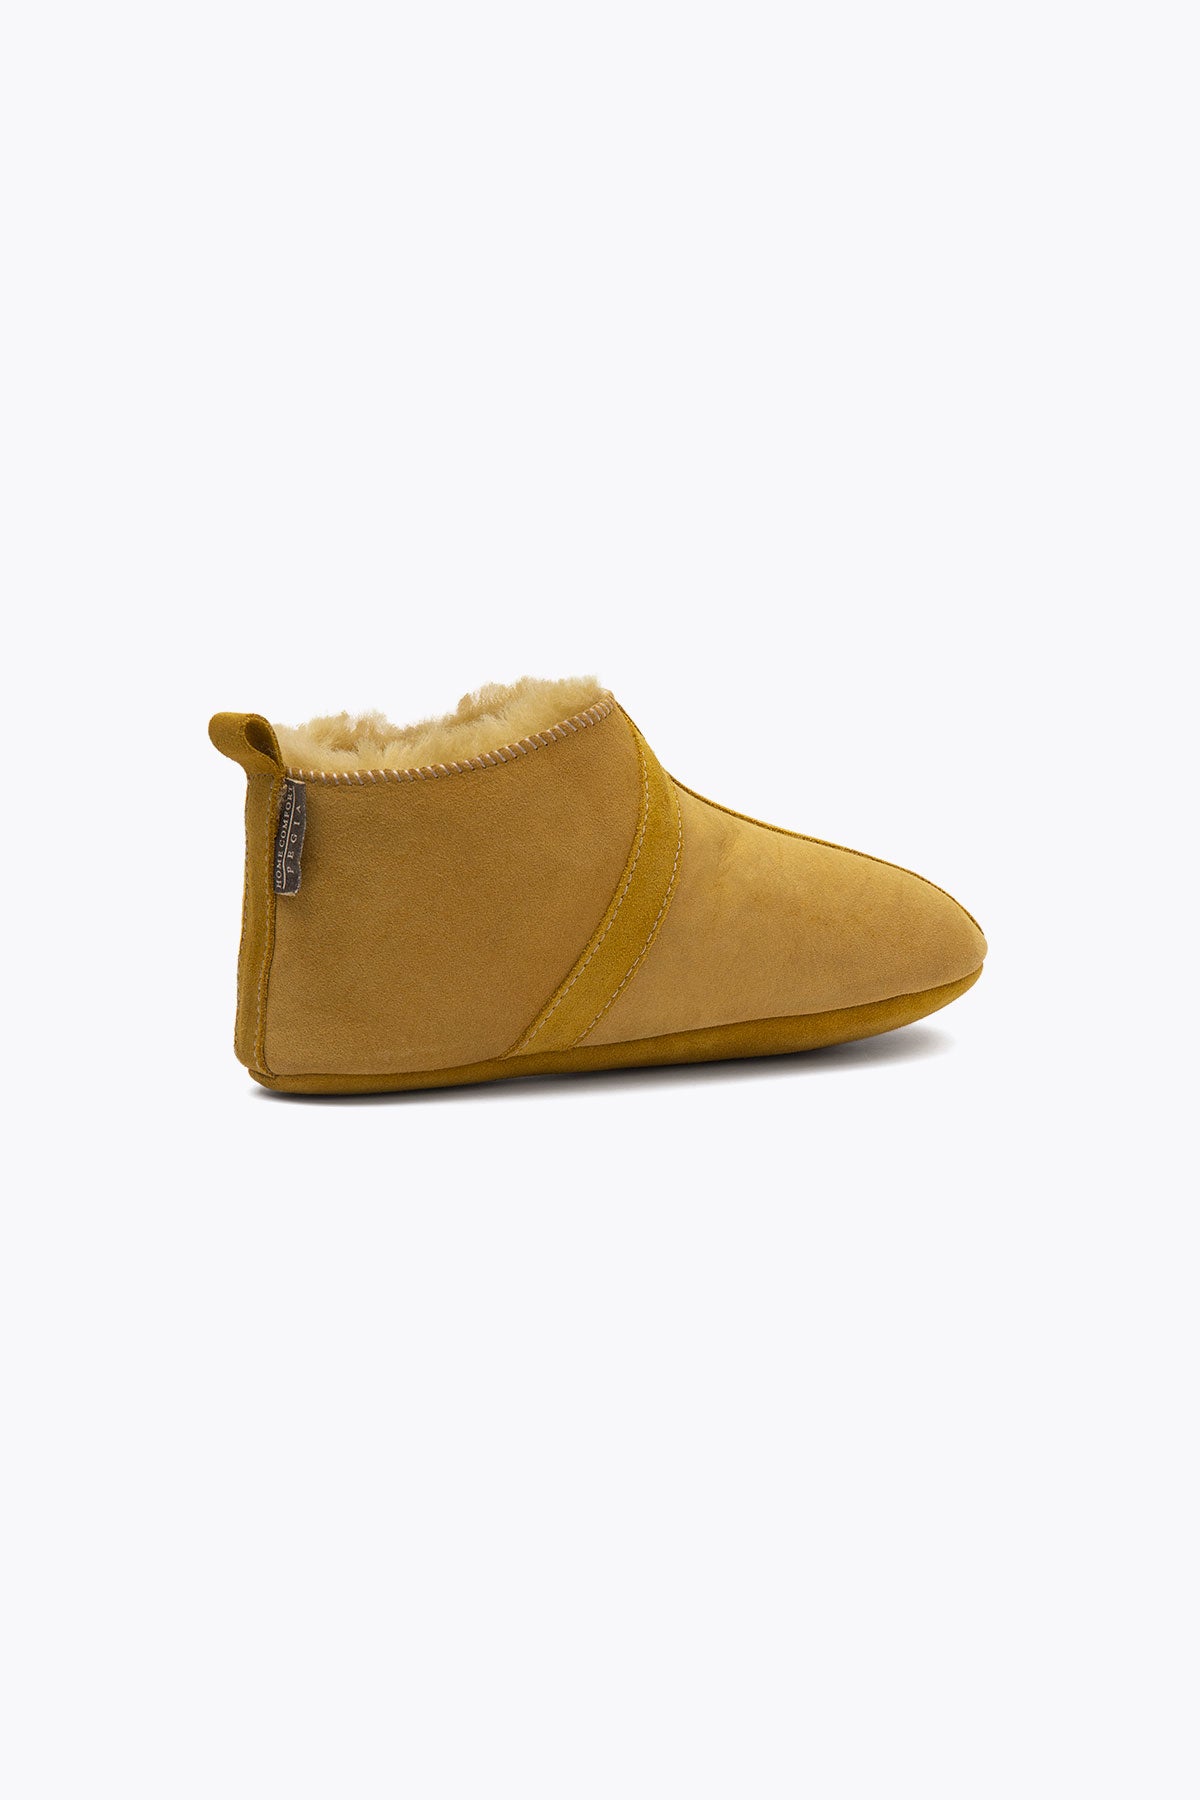 Pegia Homer Unisex Shearling Bootie Slippers